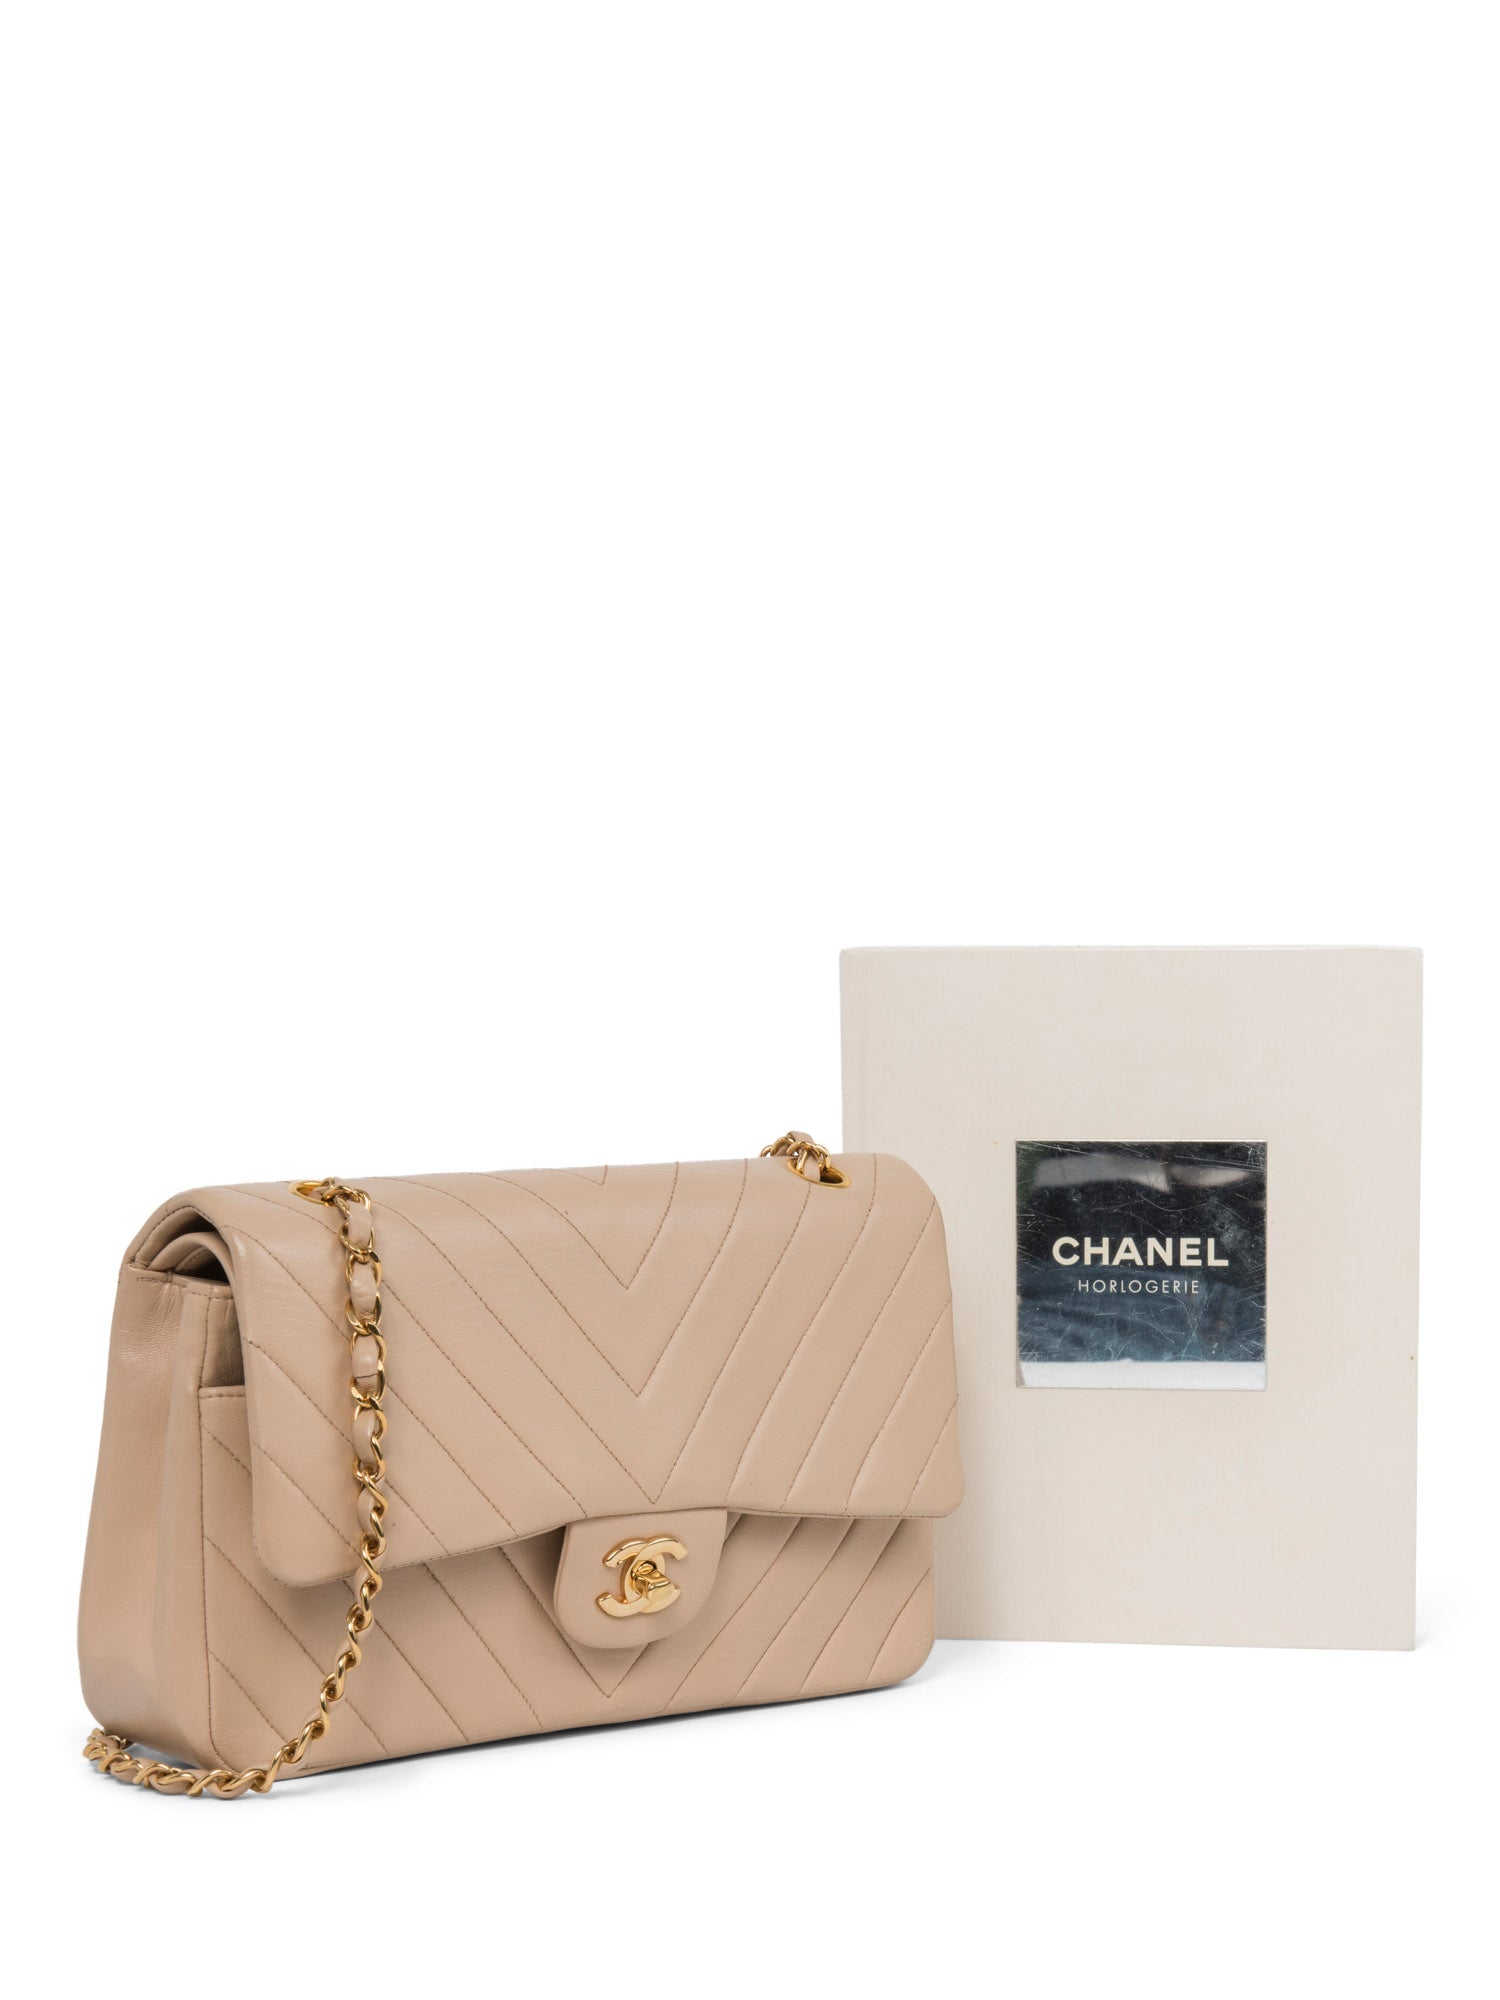 Know Your Bag: Chanel Classic Flap or 11.12 Flap? - BagAddicts Anonymous